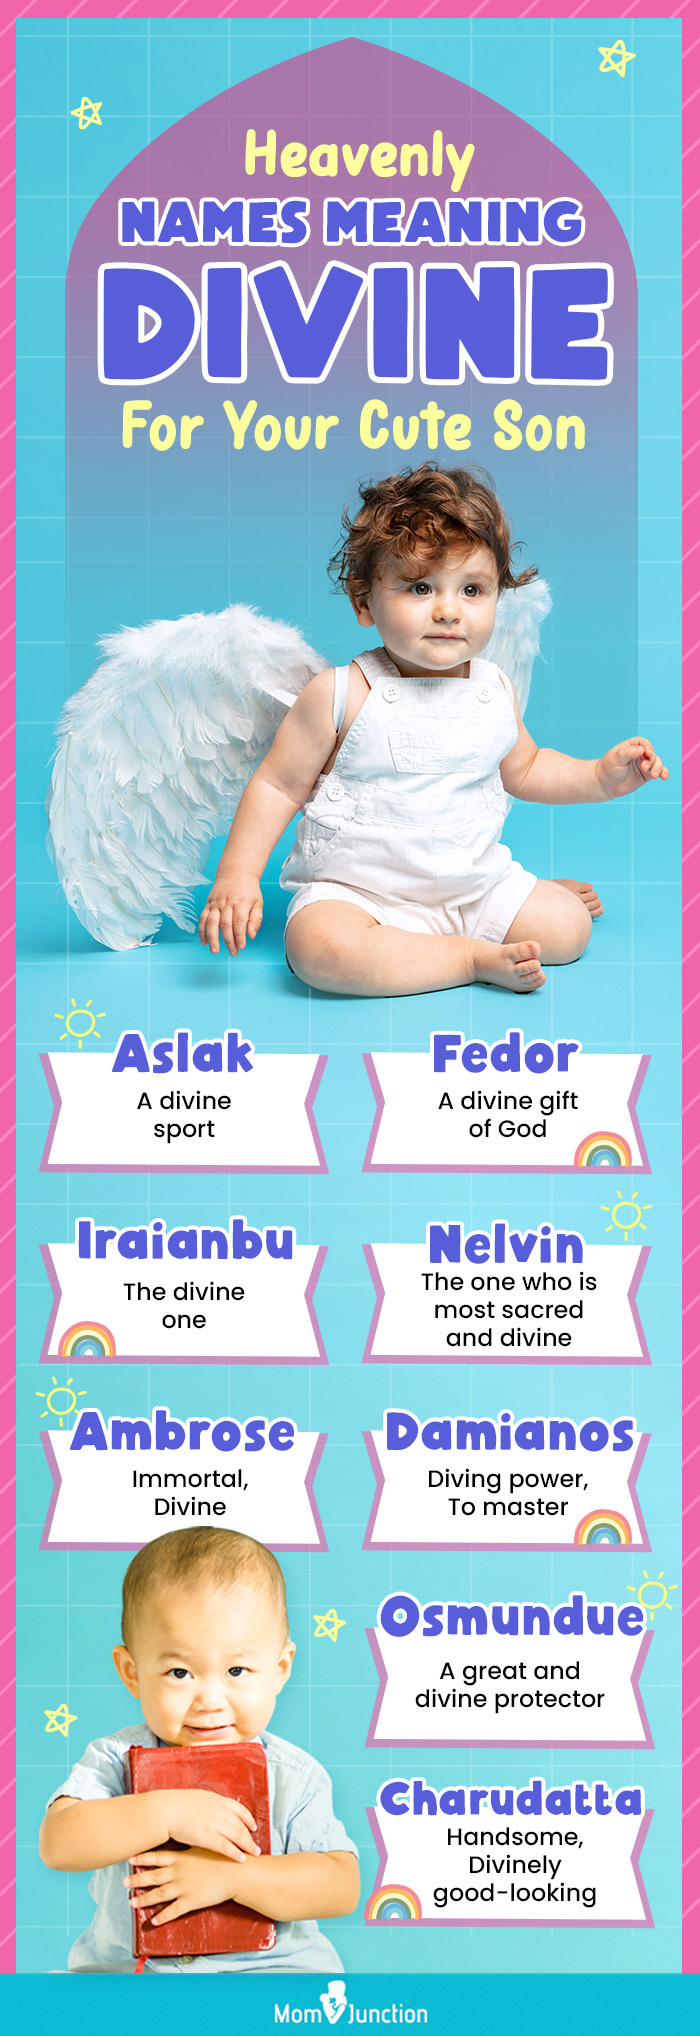 heavenly names meaning divine for your cute son (infographic)